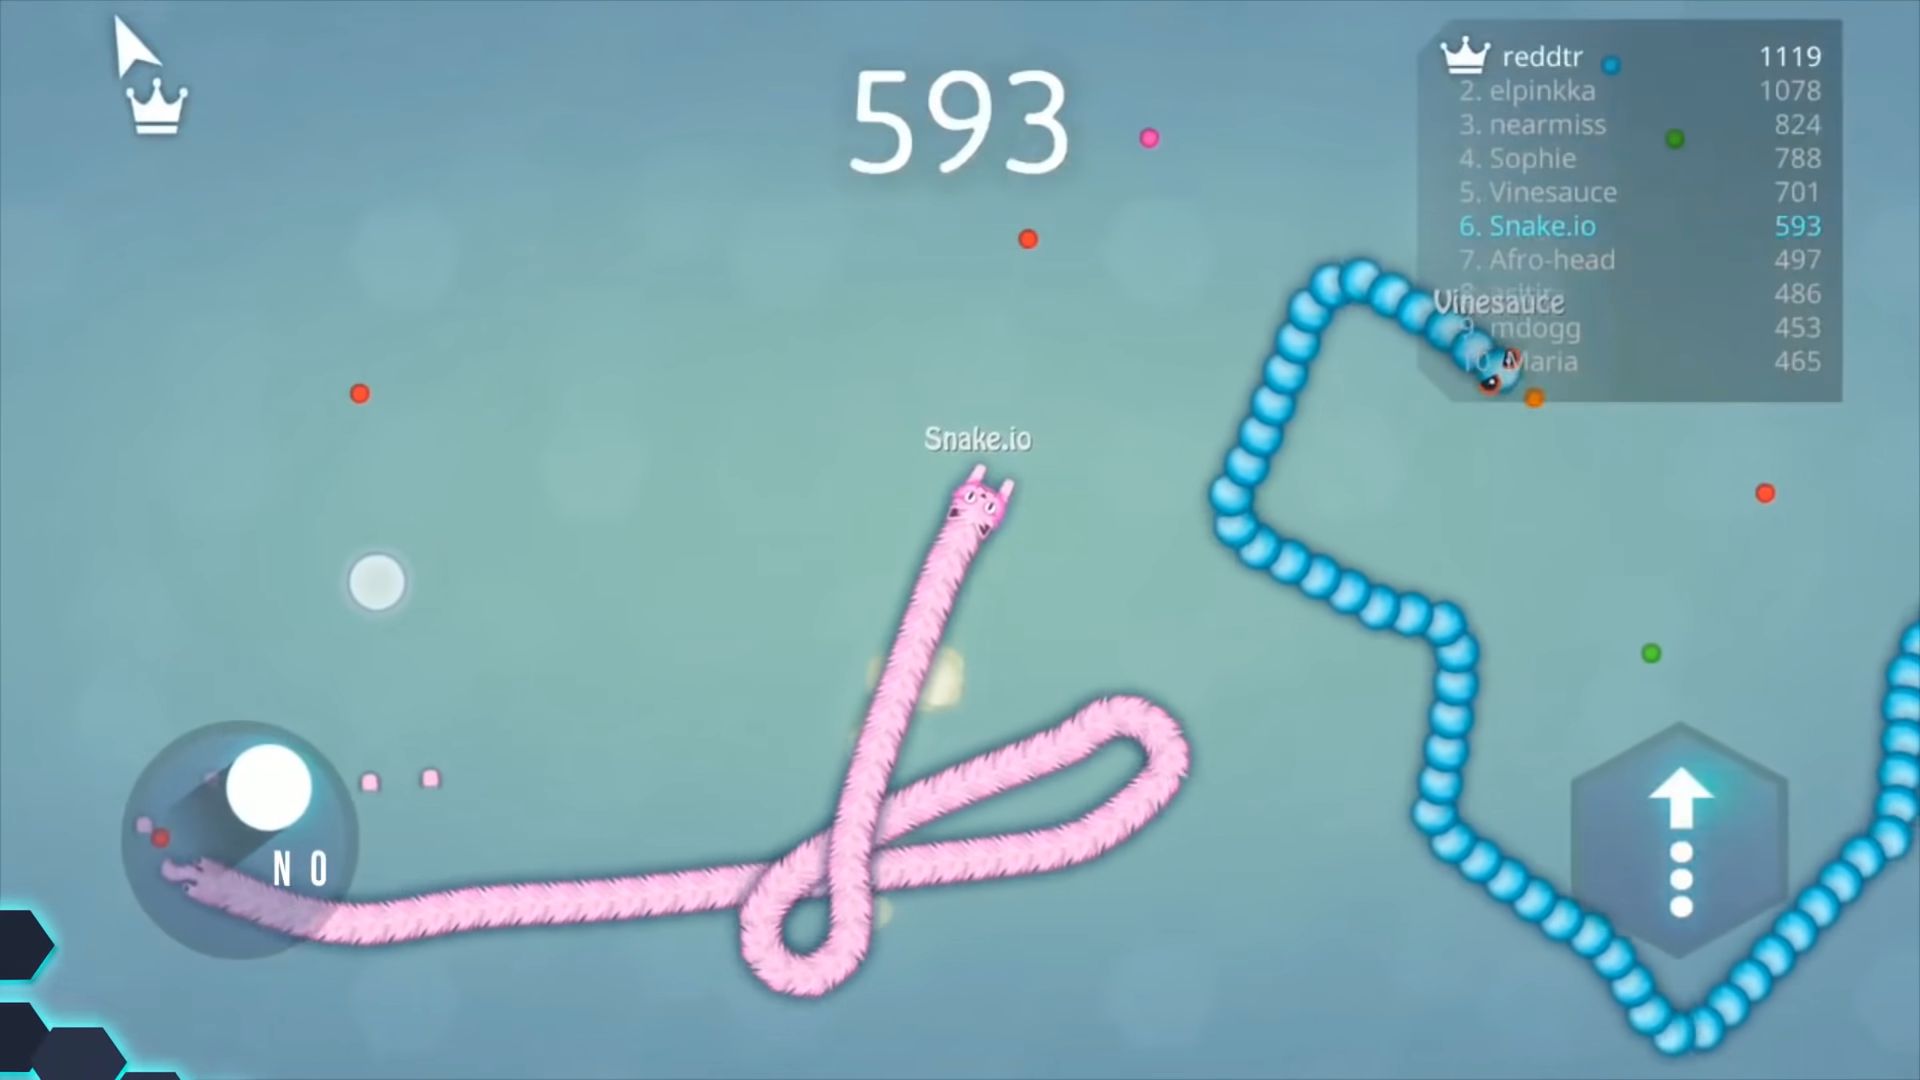 Snake.io - Fun Addicting Arcade Battle .io Games Review & Download - App Of  The Day